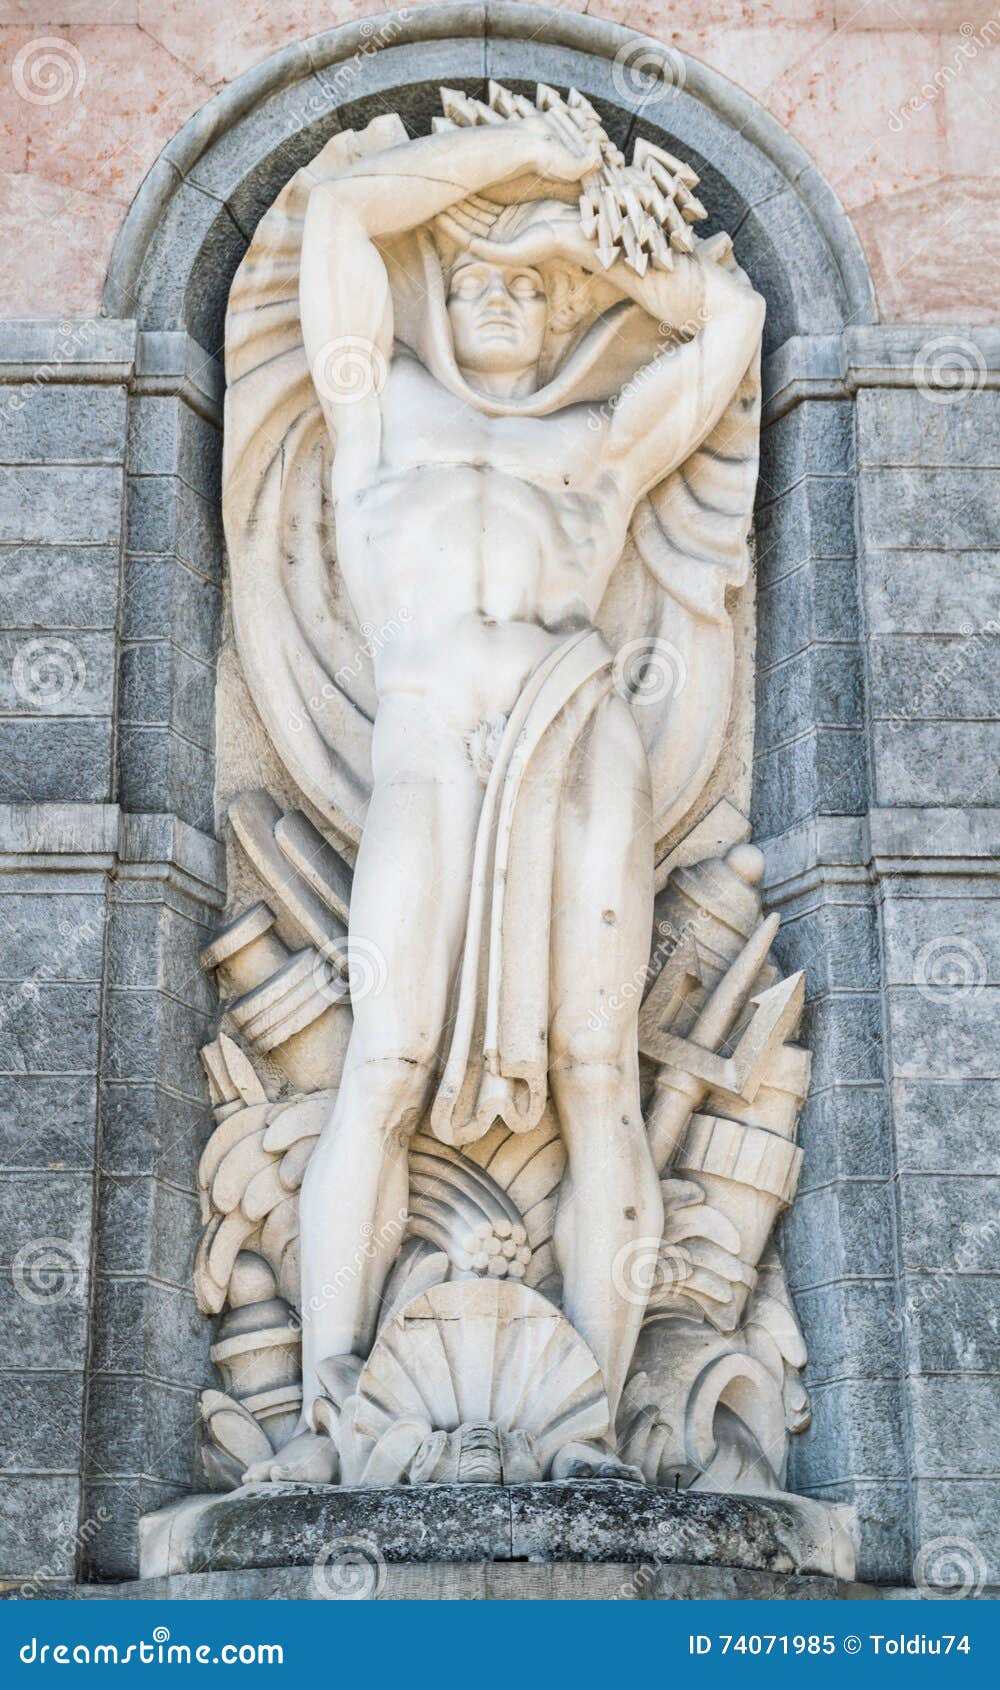 statue of the god neptune on the facade a hydroelectric plant.